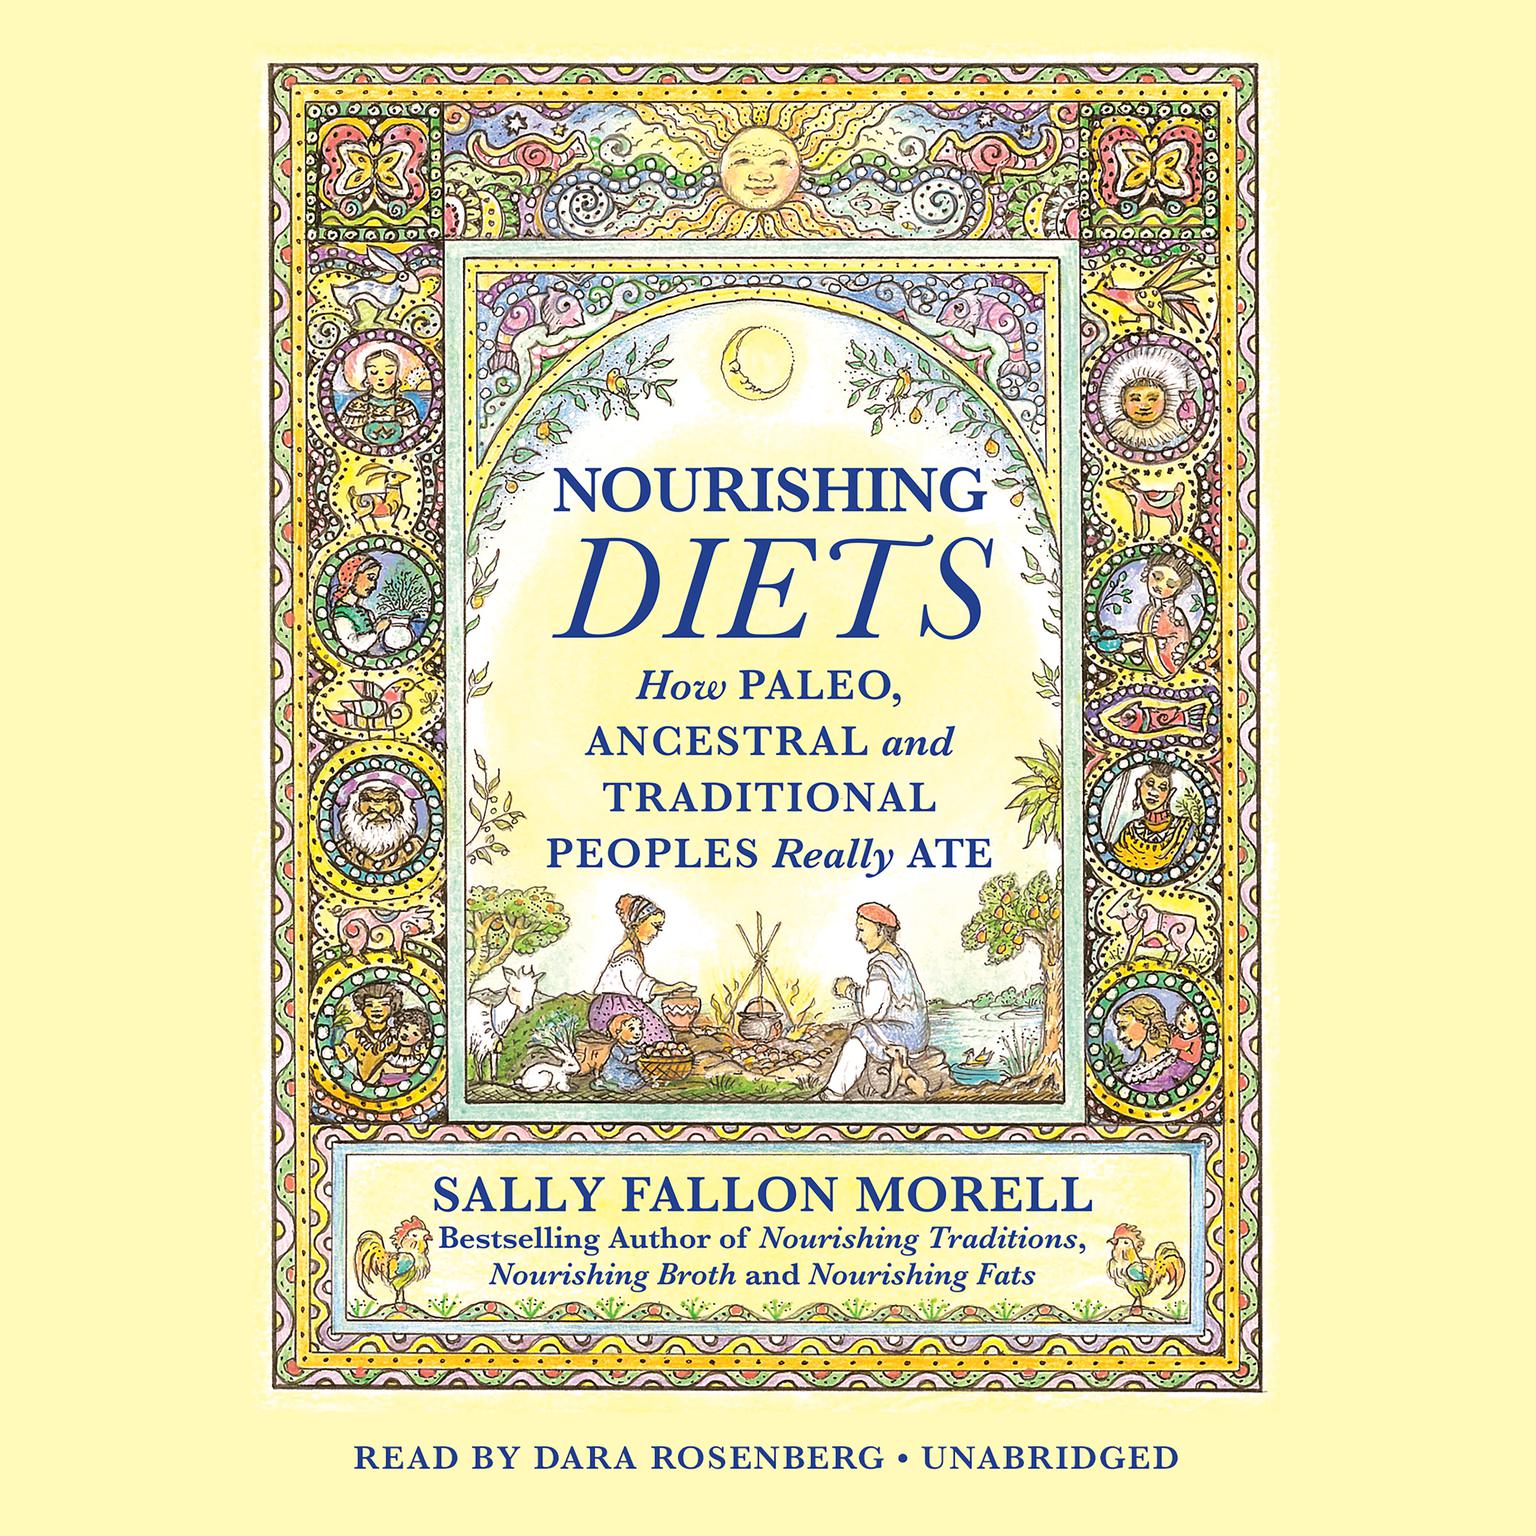 Nourishing Diets: How Paleo, Ancestral and Traditional Peoples Really Ate Audiobook, by Sally Fallon Morell